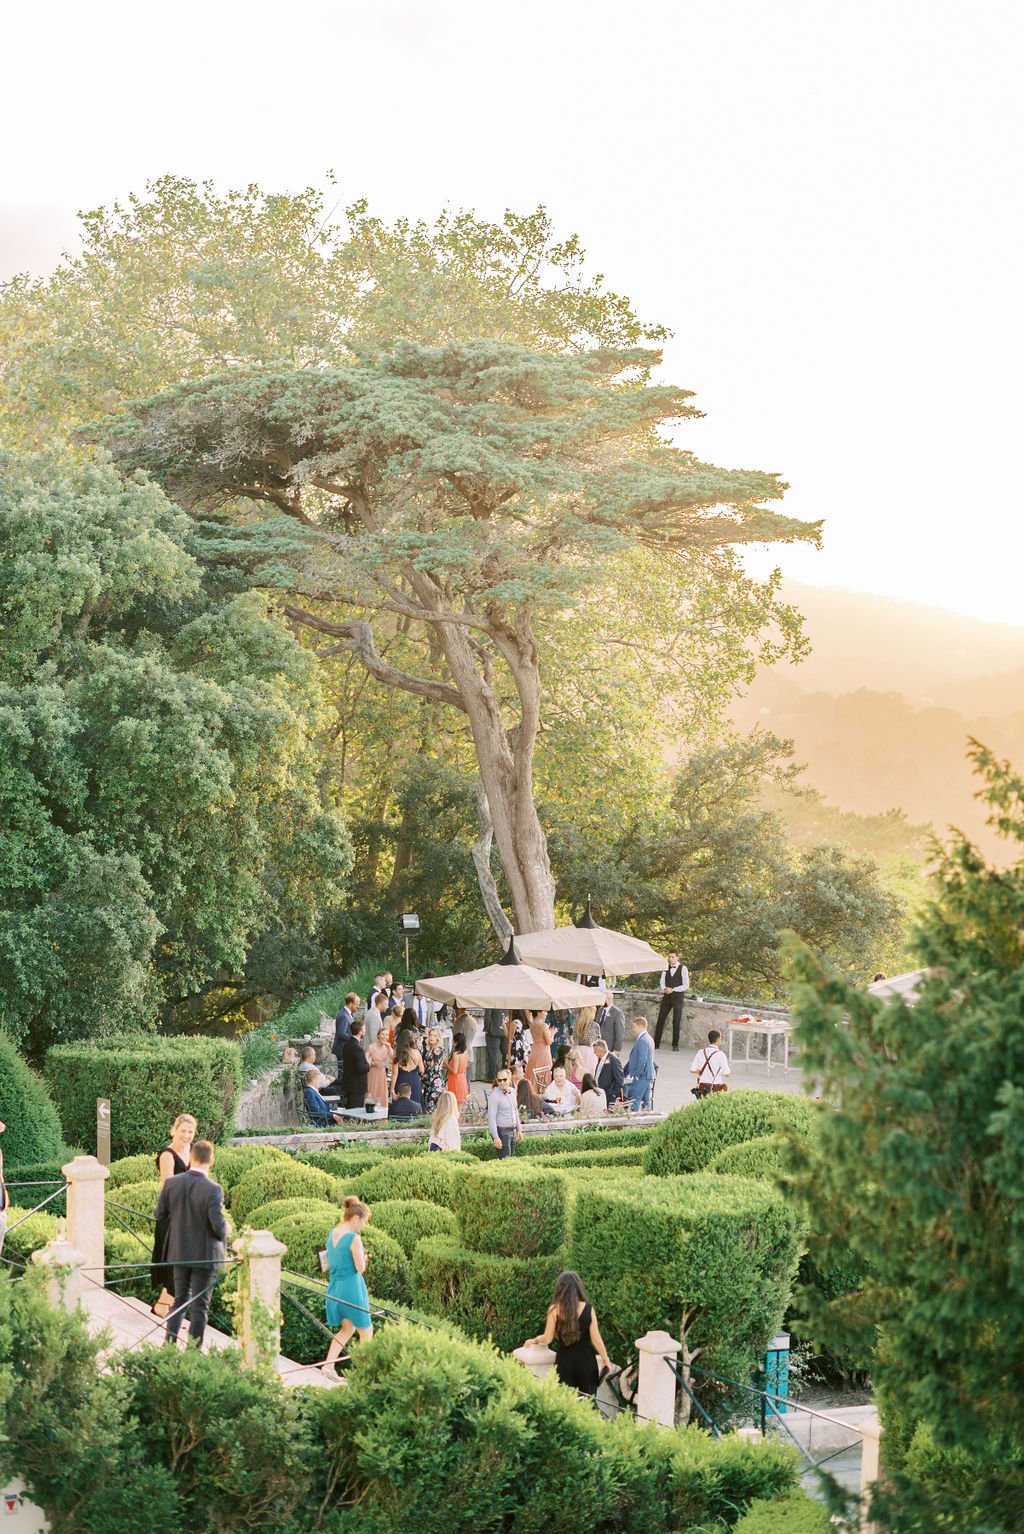 Beautiful sunset image behind Palácio de Seteais in Sintra, with tall trees and wedding guests gathering underneath